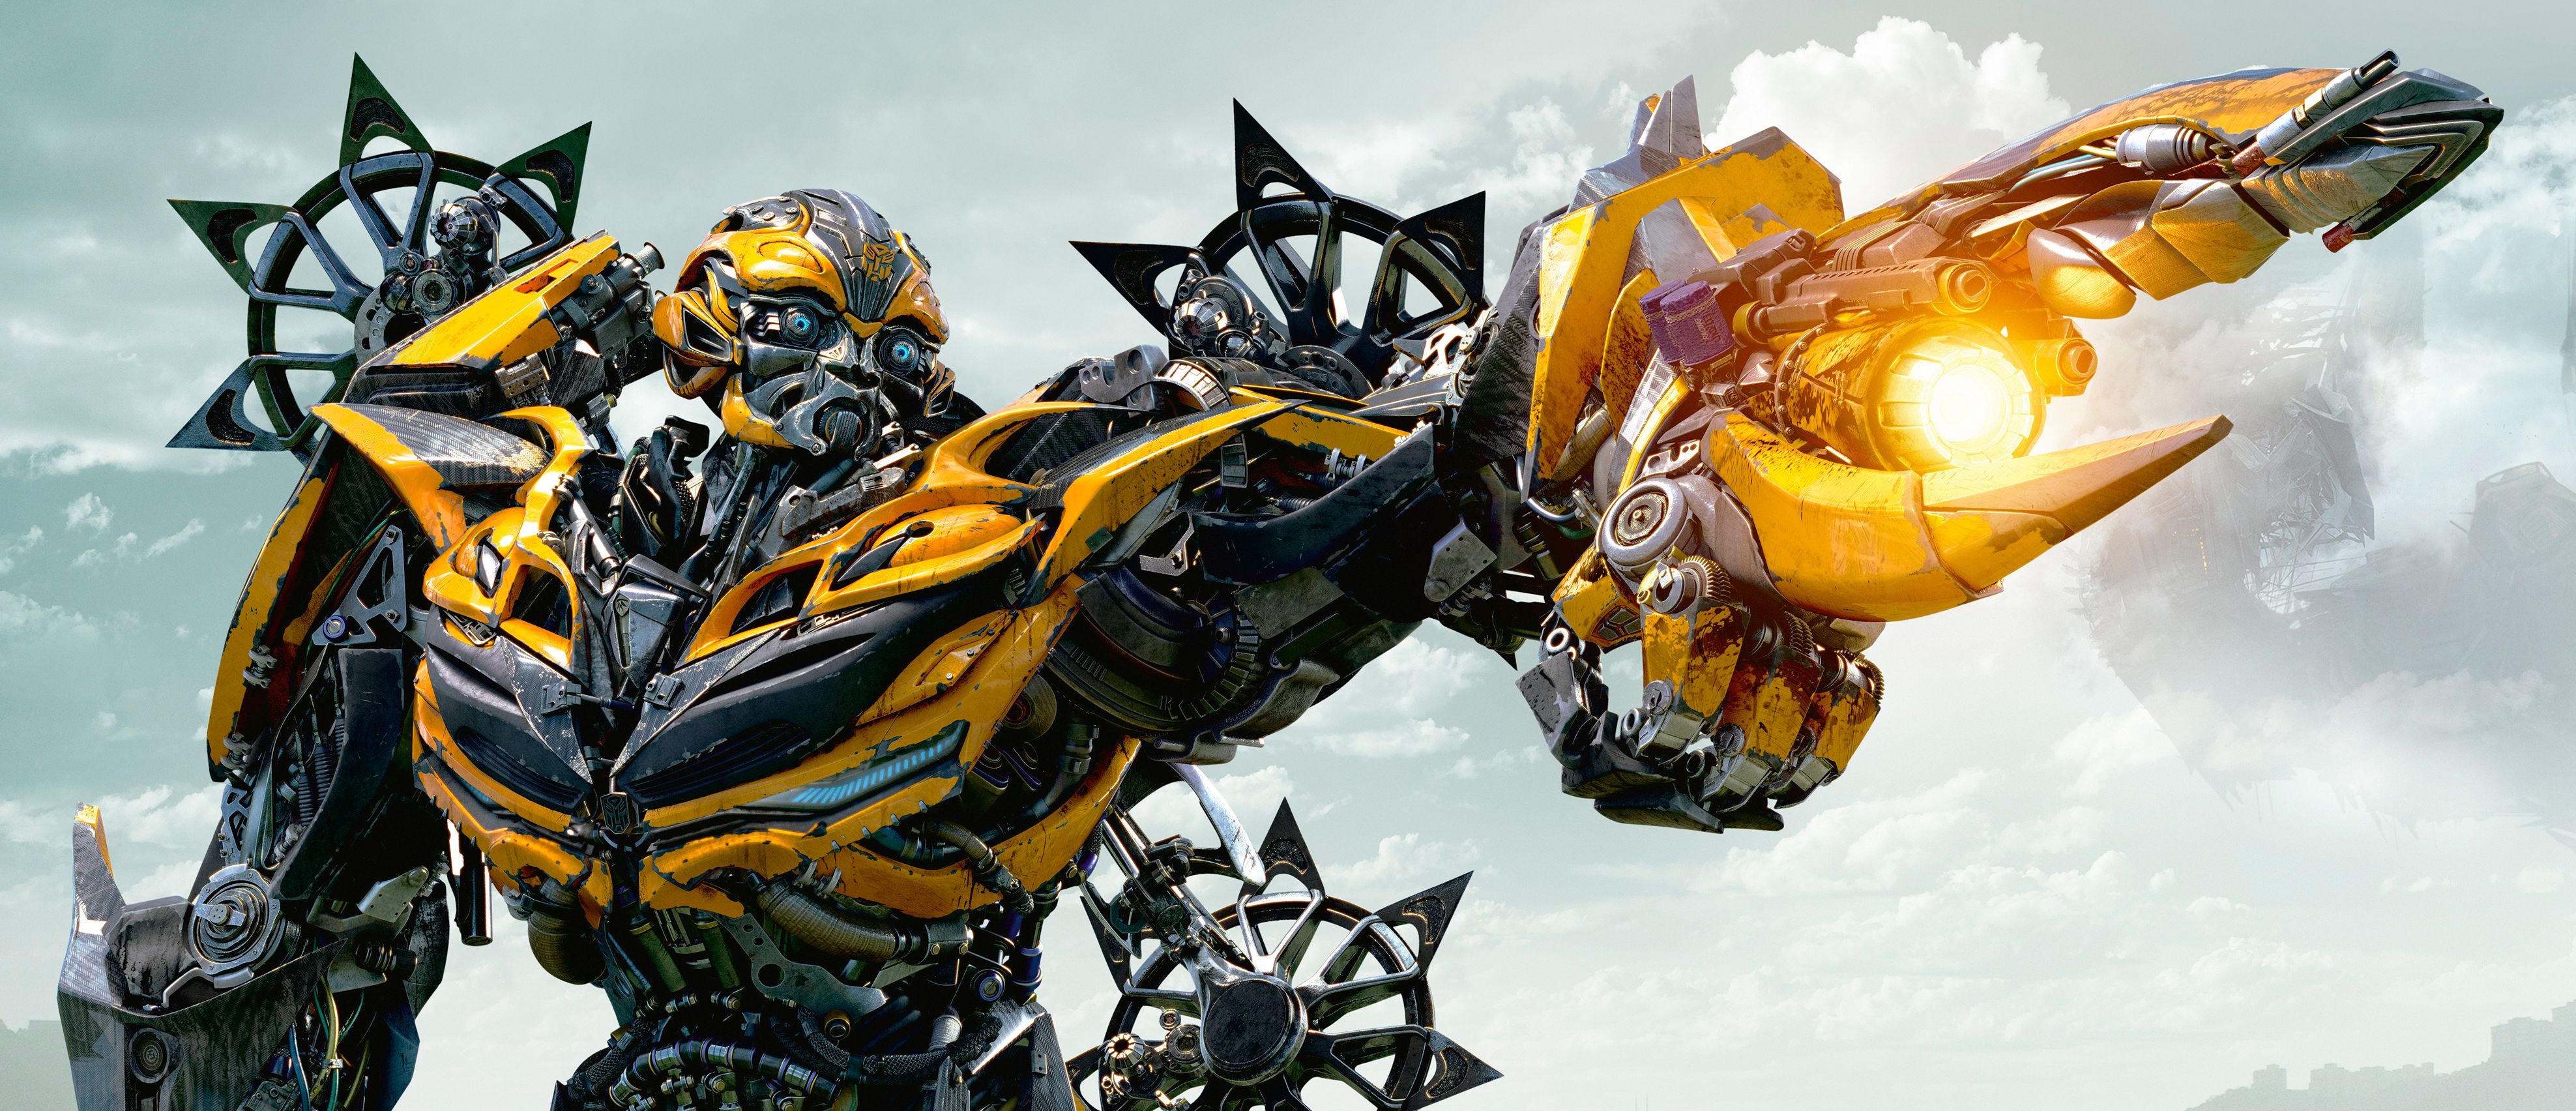 Transformers Movies In Development, Here's The Ones We Know About